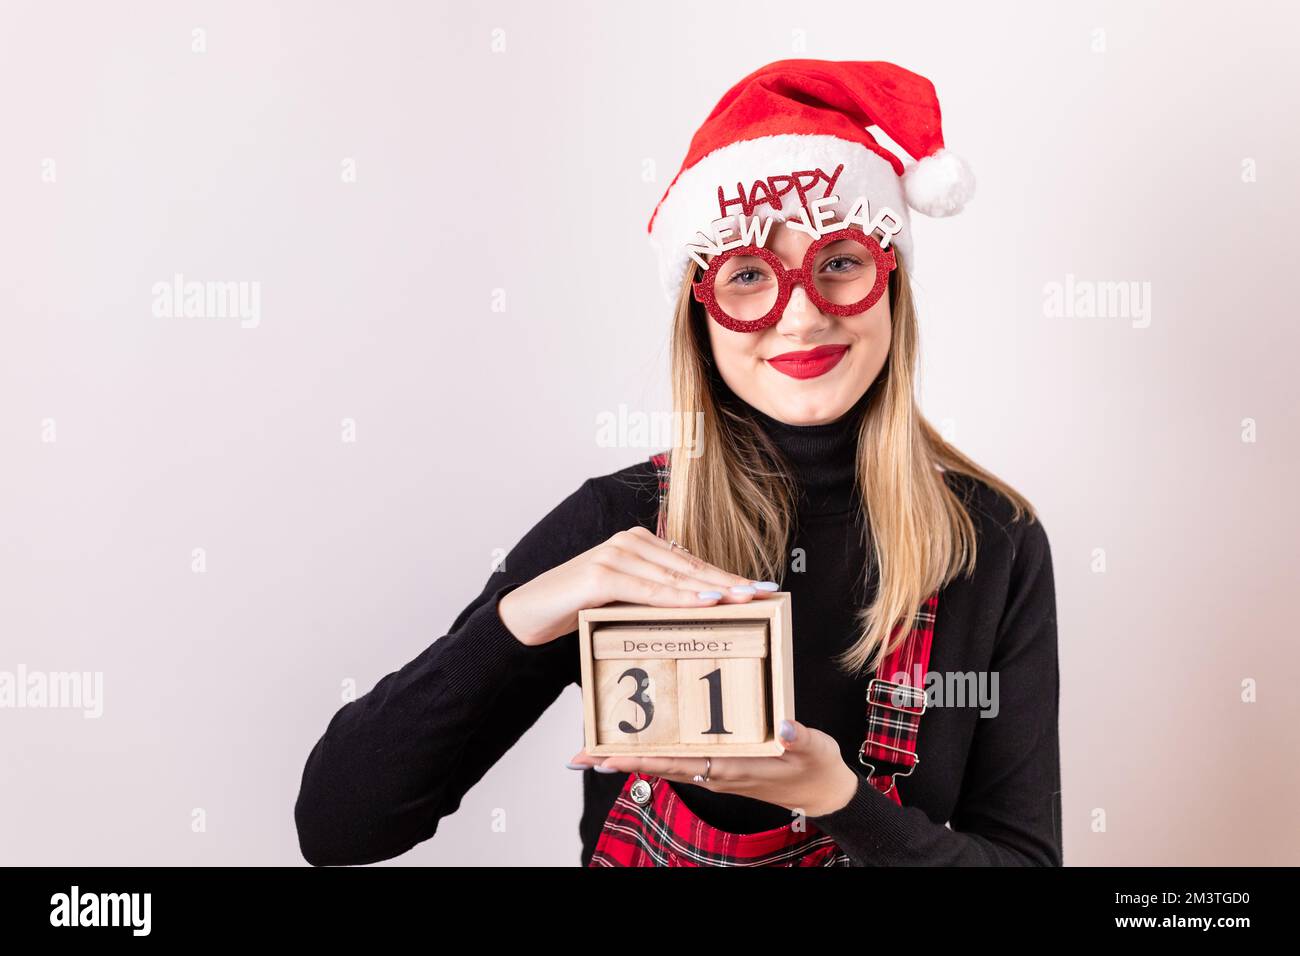 Beautiful, young, blonde girl with Santa hat and prop glasses holding a wooden calendar date box. December 31st Stock Photo